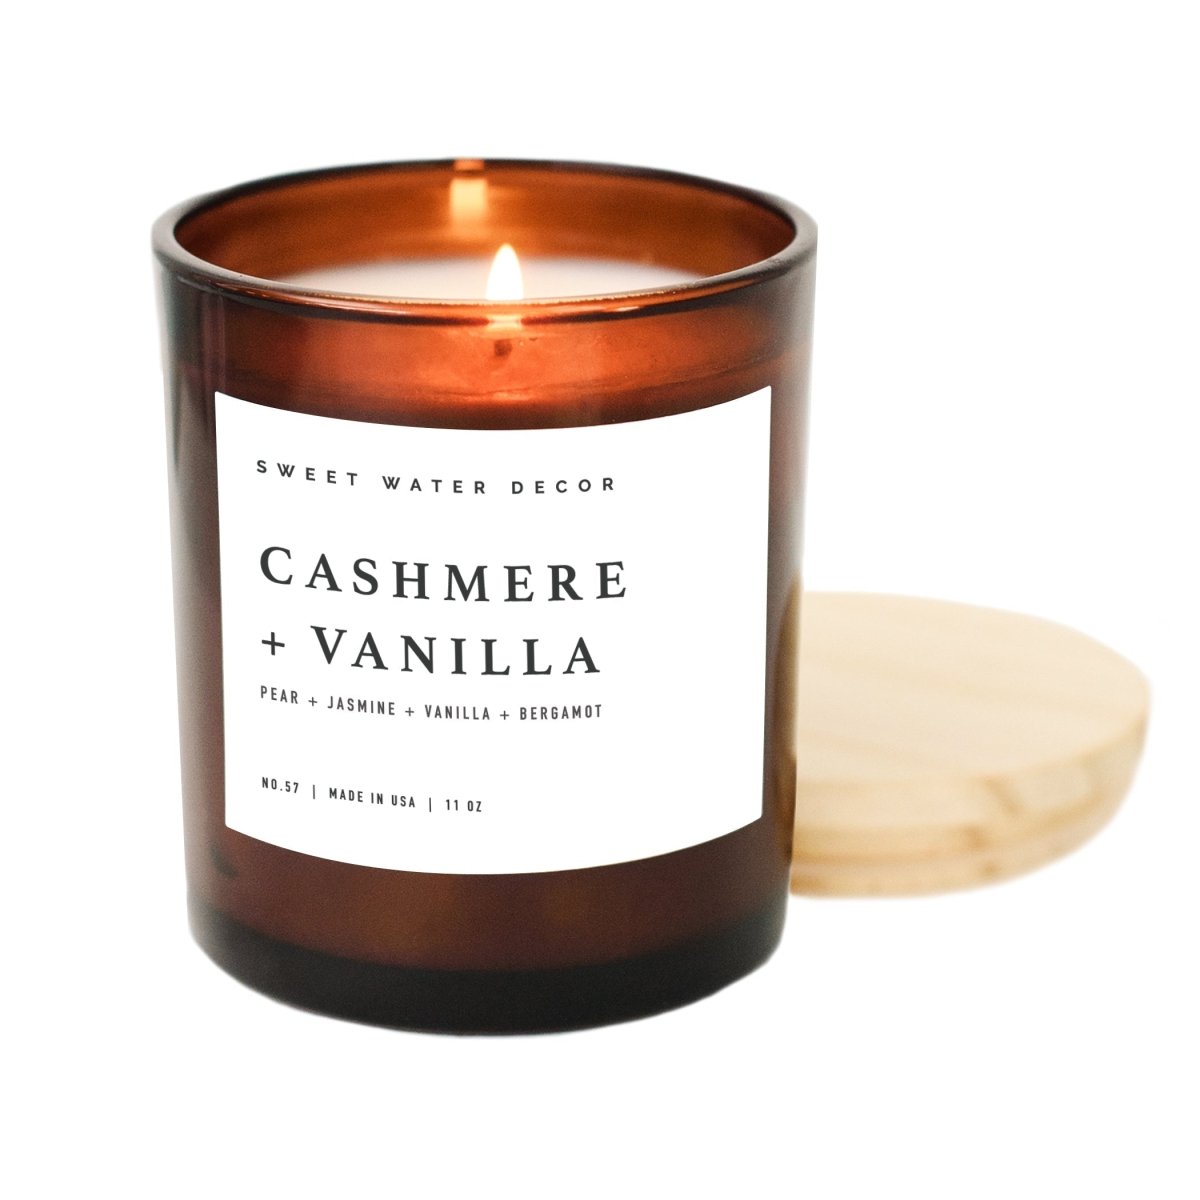 Sweet Water Decor Cashmere and Vanilla Soy Candle - Amber Jar - 11 oz - lily & onyx